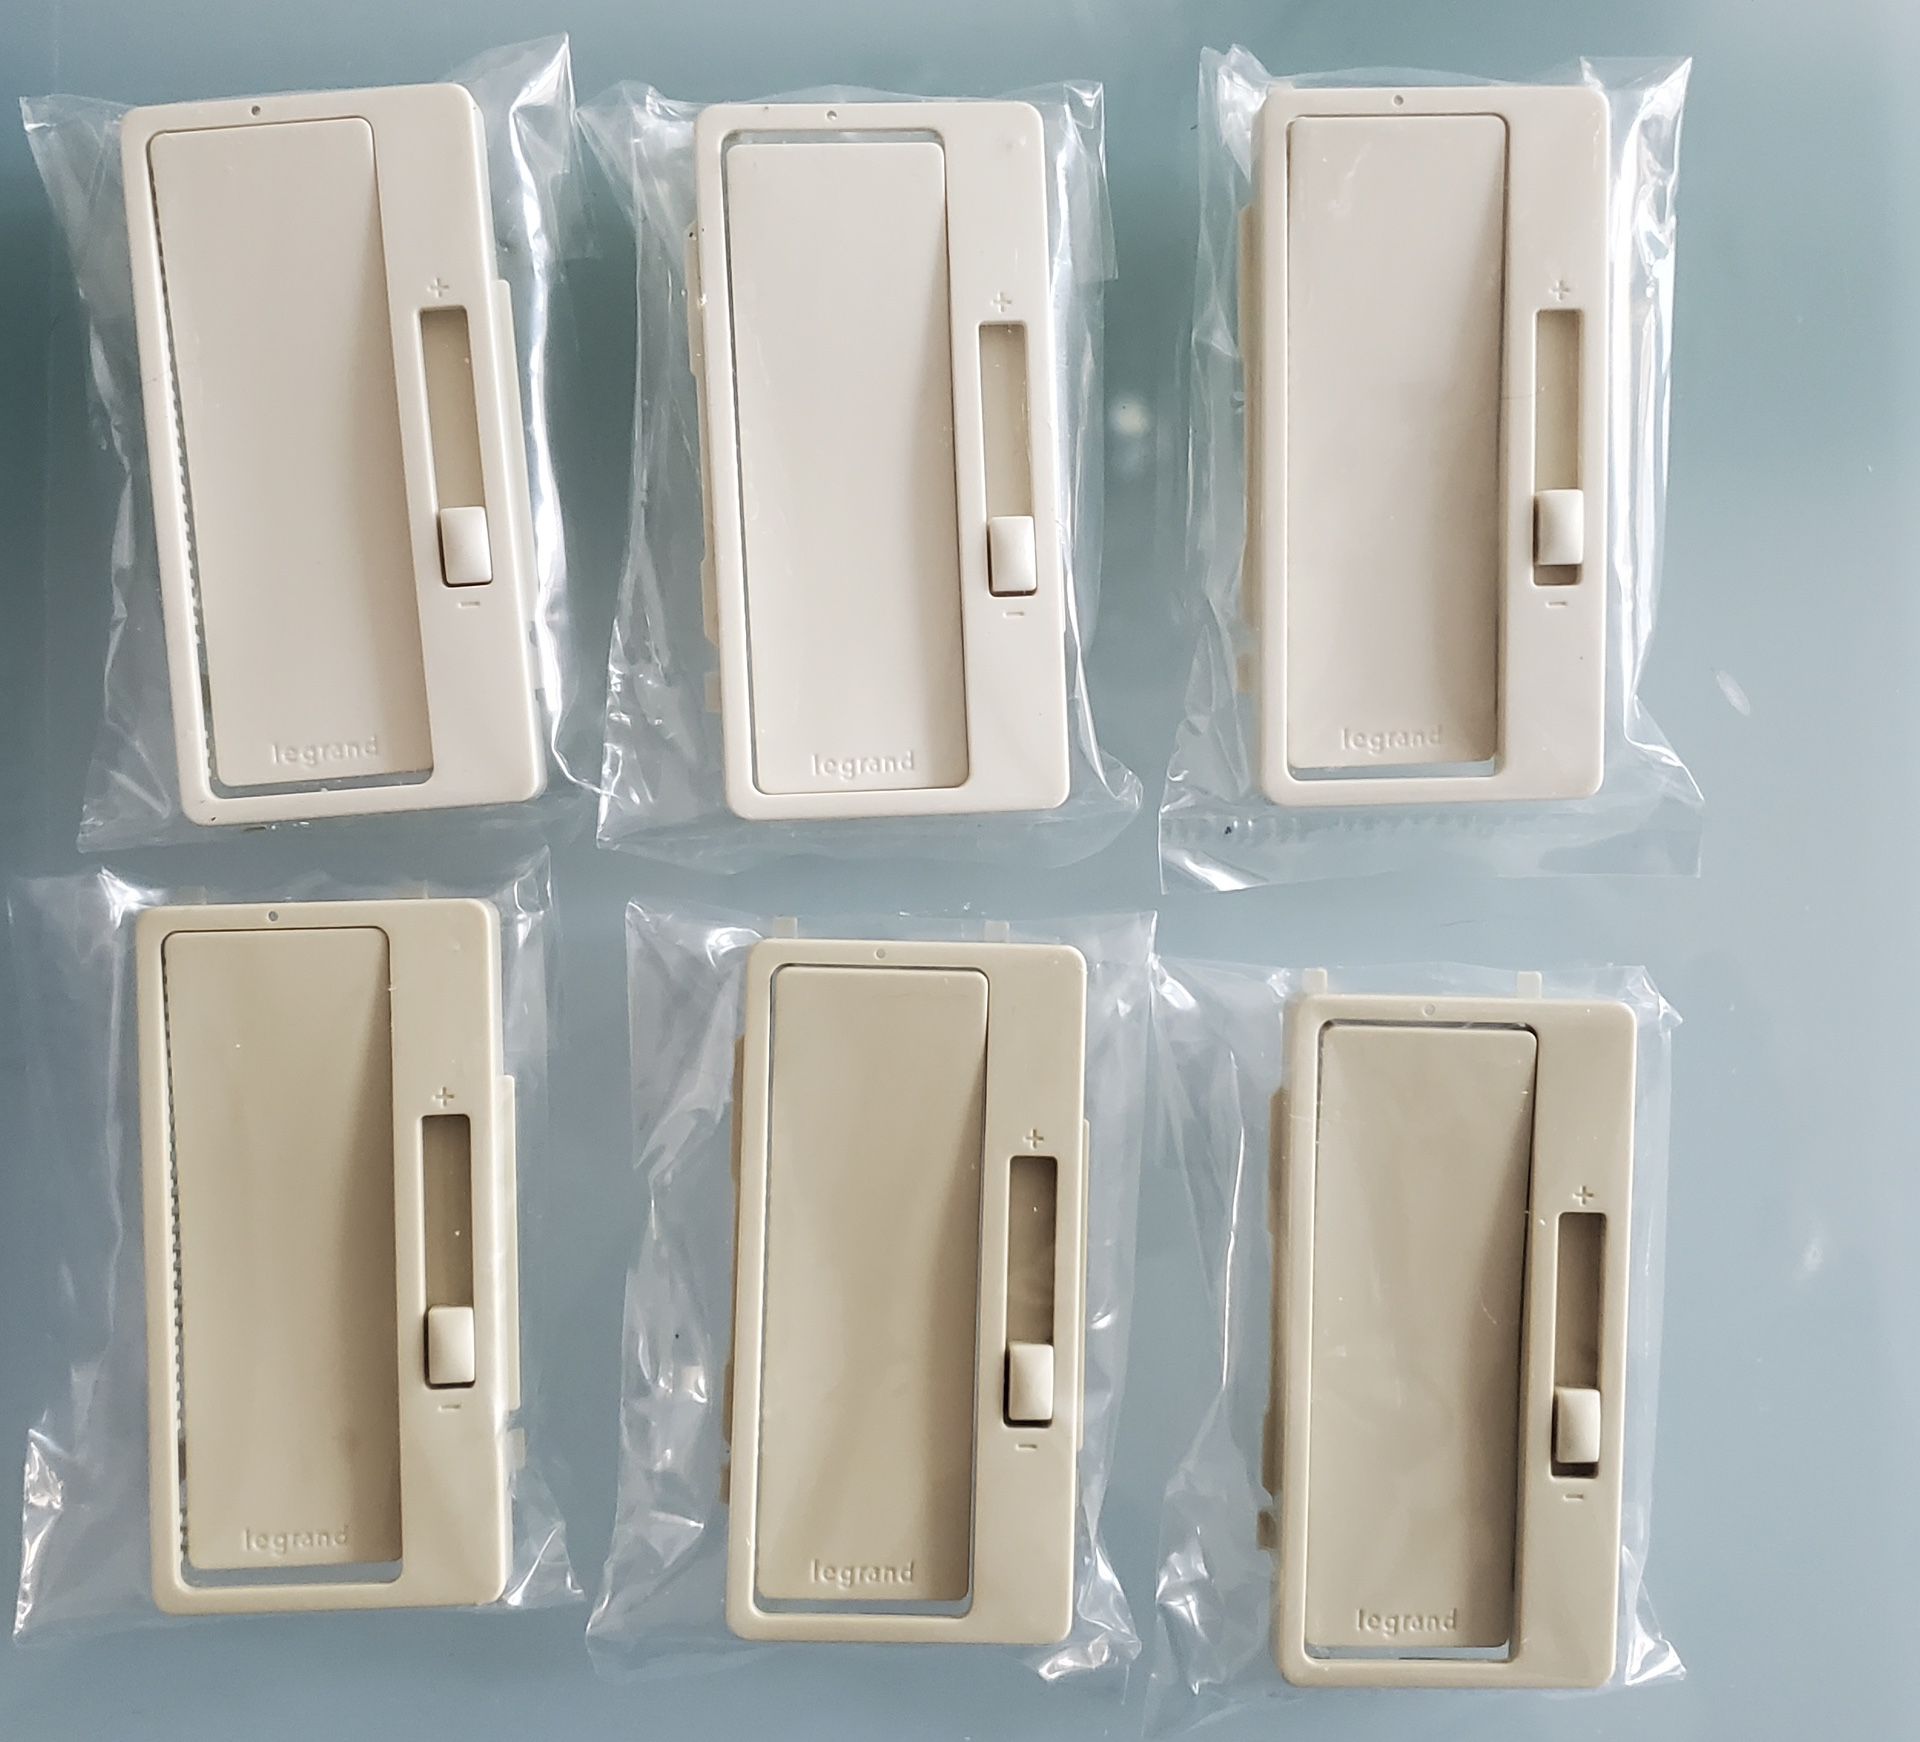 Legrand Dimmer Switch Replacement Faceplate Cover Ivory & Light Almond (up to 3 of each) Brand New! Price each